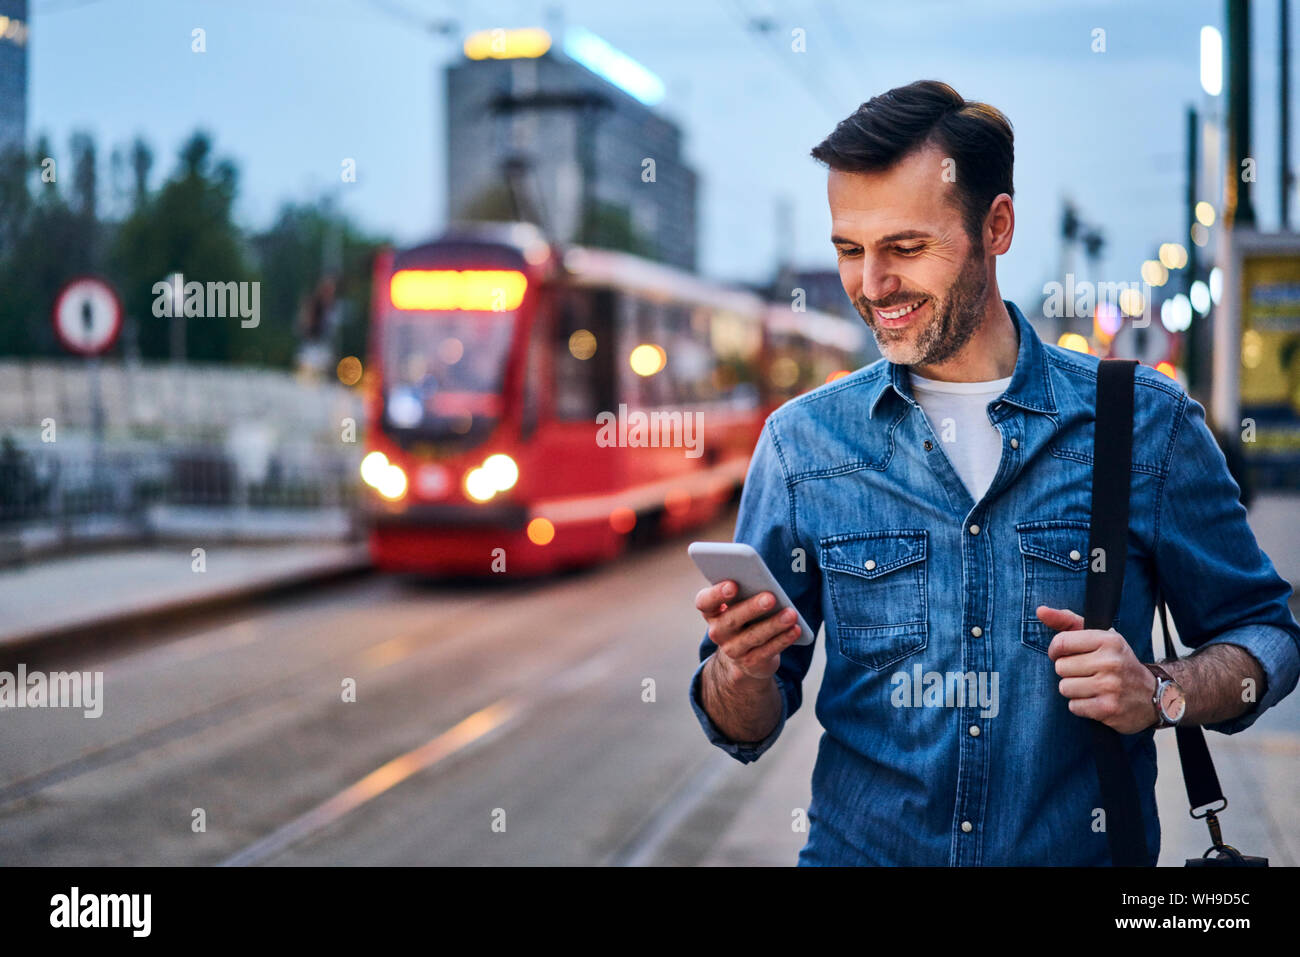 Man using smartphone while waiting for public tram in the evening Stock Photo